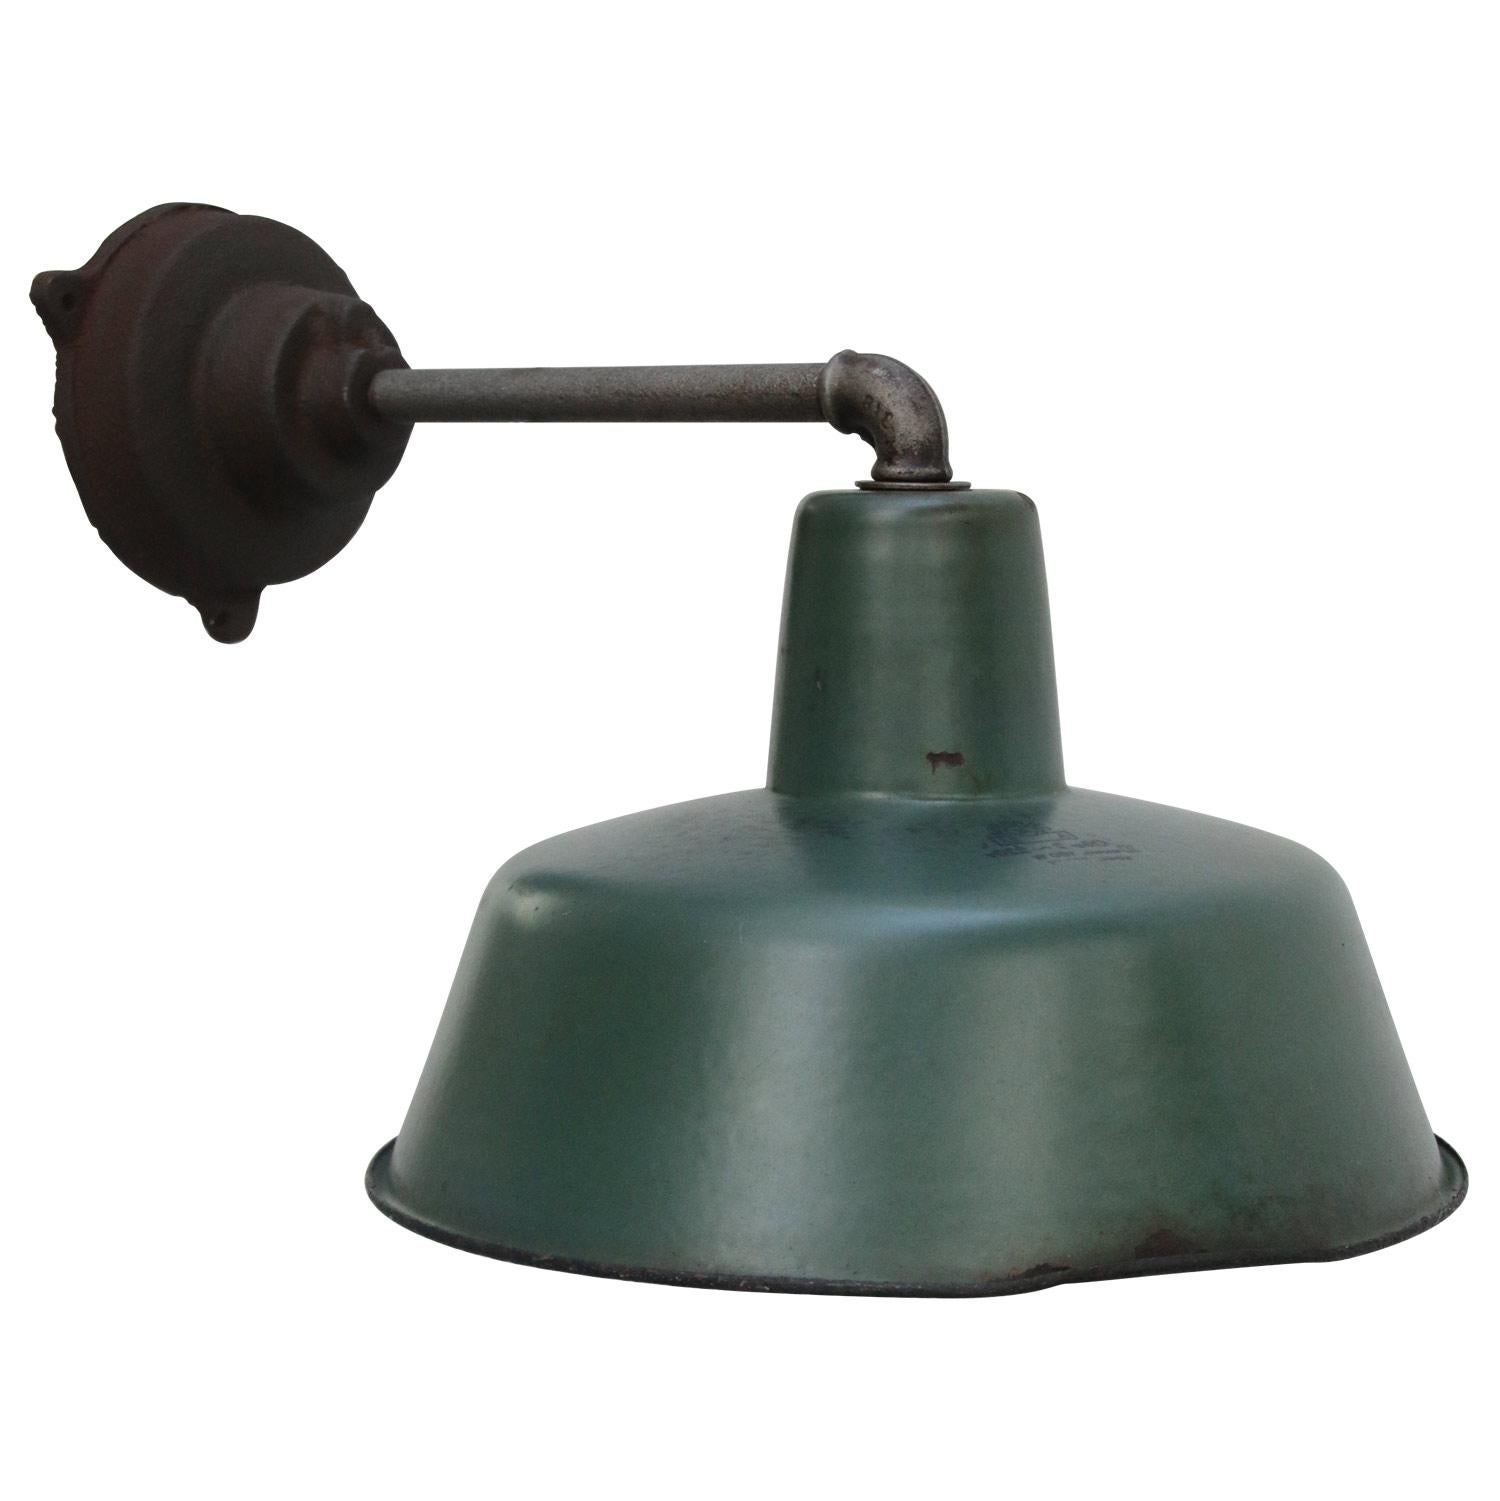 Factory wall light
Green enamel, white interior

diameter cast iron wall piece: 12 cm, 3 holes to secure

Weight: 3.10 kg / 6.8 lb

Priced per individual item. All lamps have been made suitable by international standards for incandescent